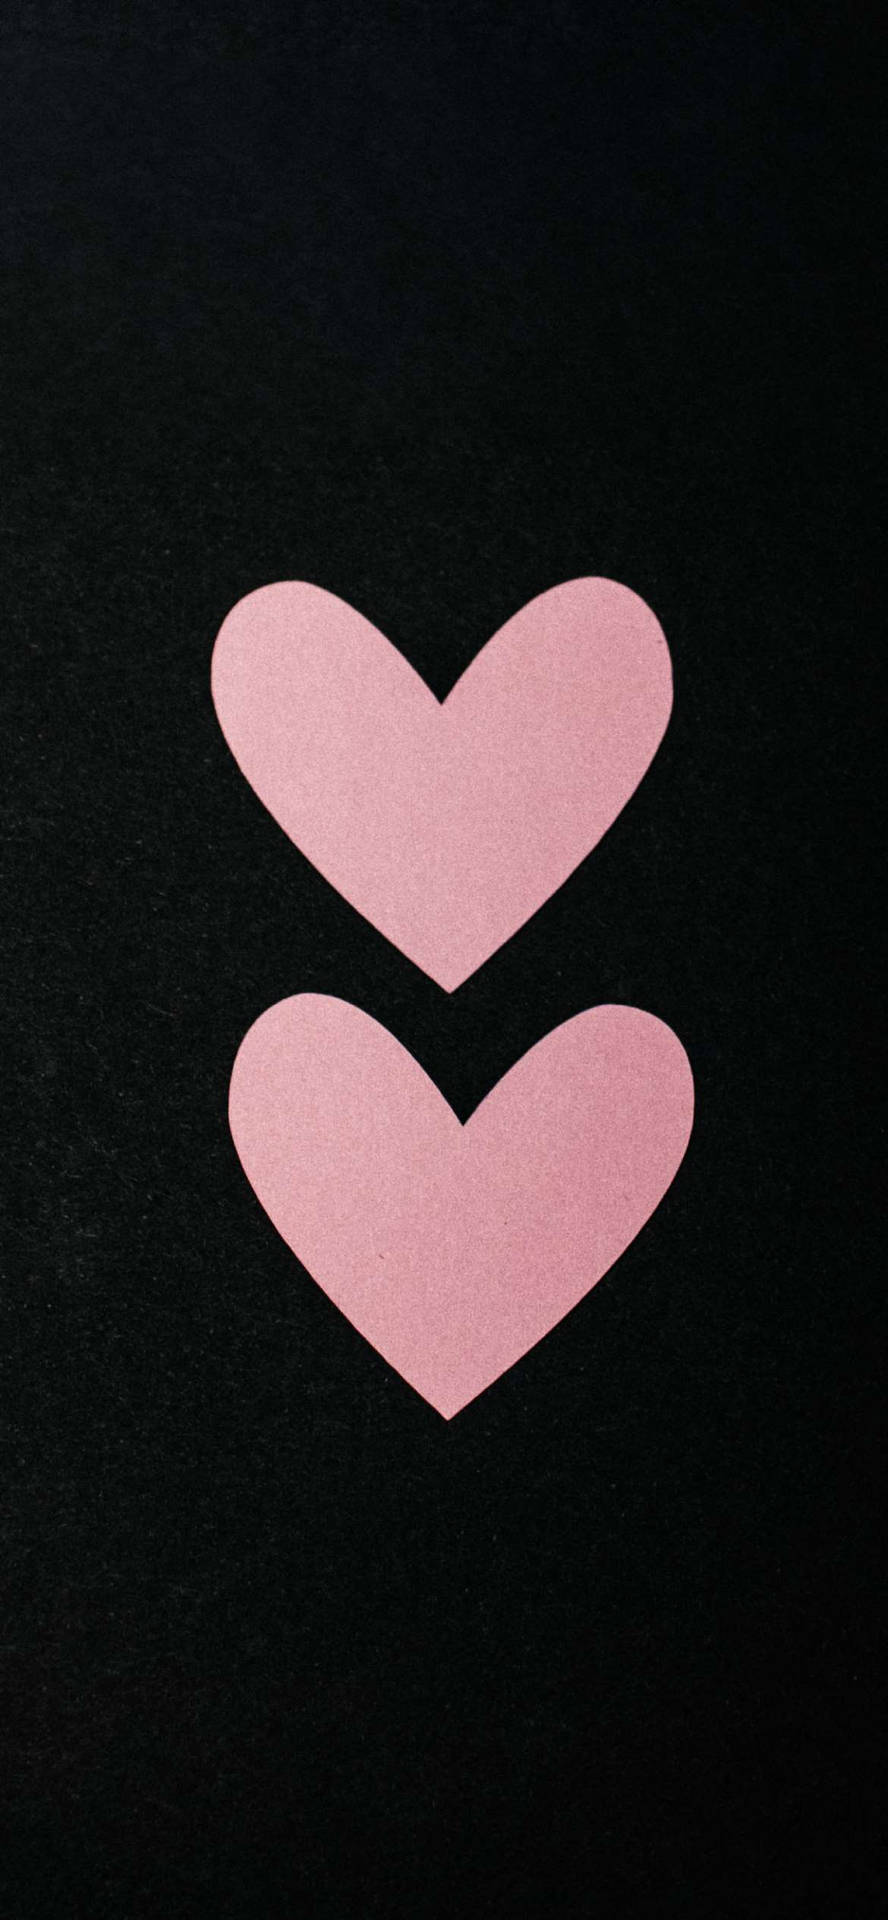 Two Pink Hearts On A Black Background Wallpaper